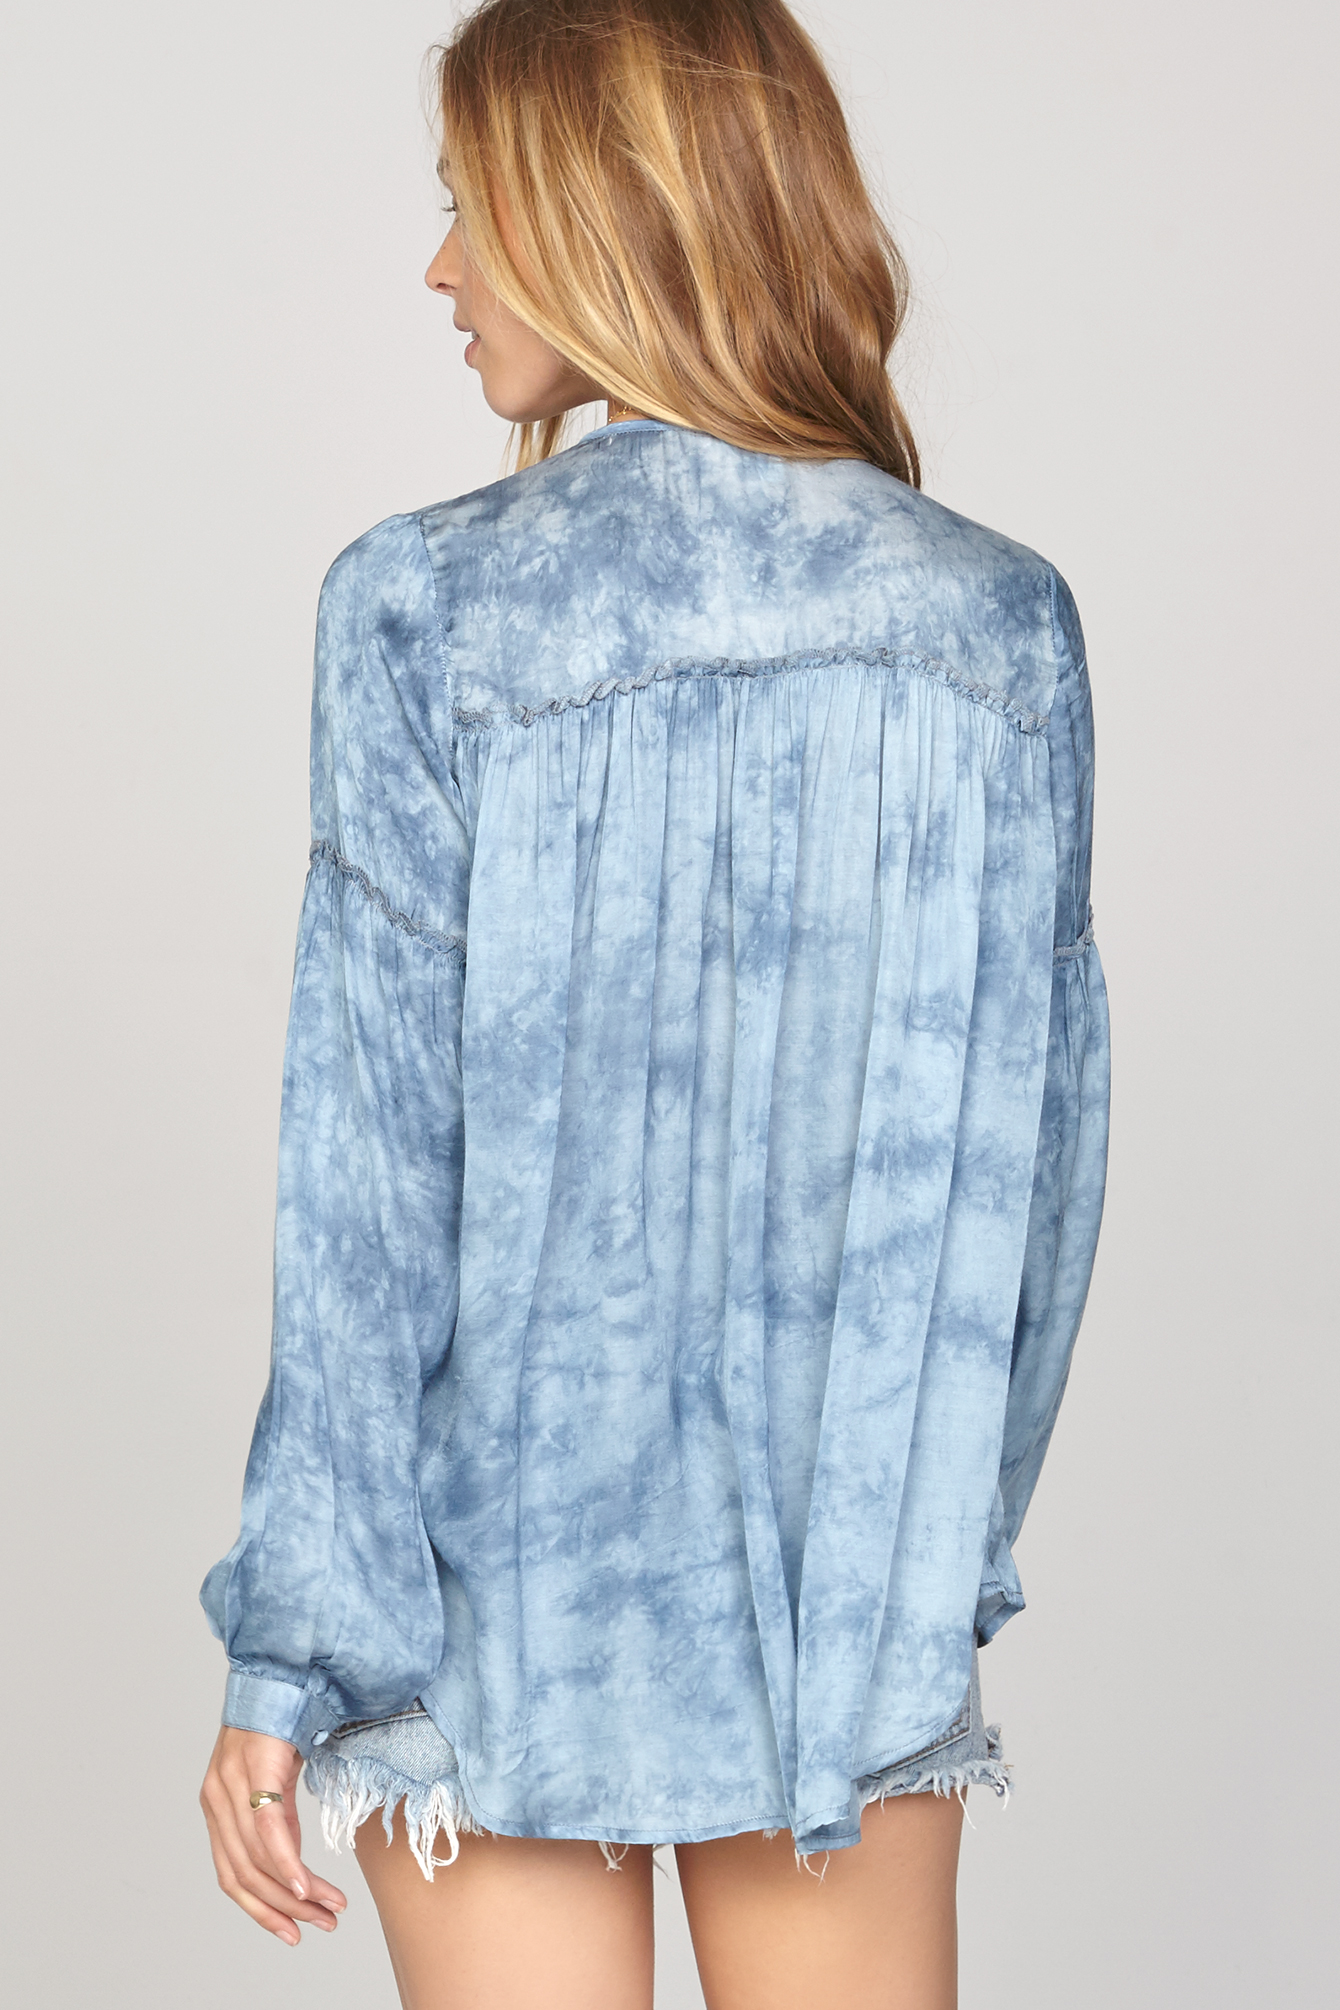 washed out woven blu riviera blue 2 73 cf